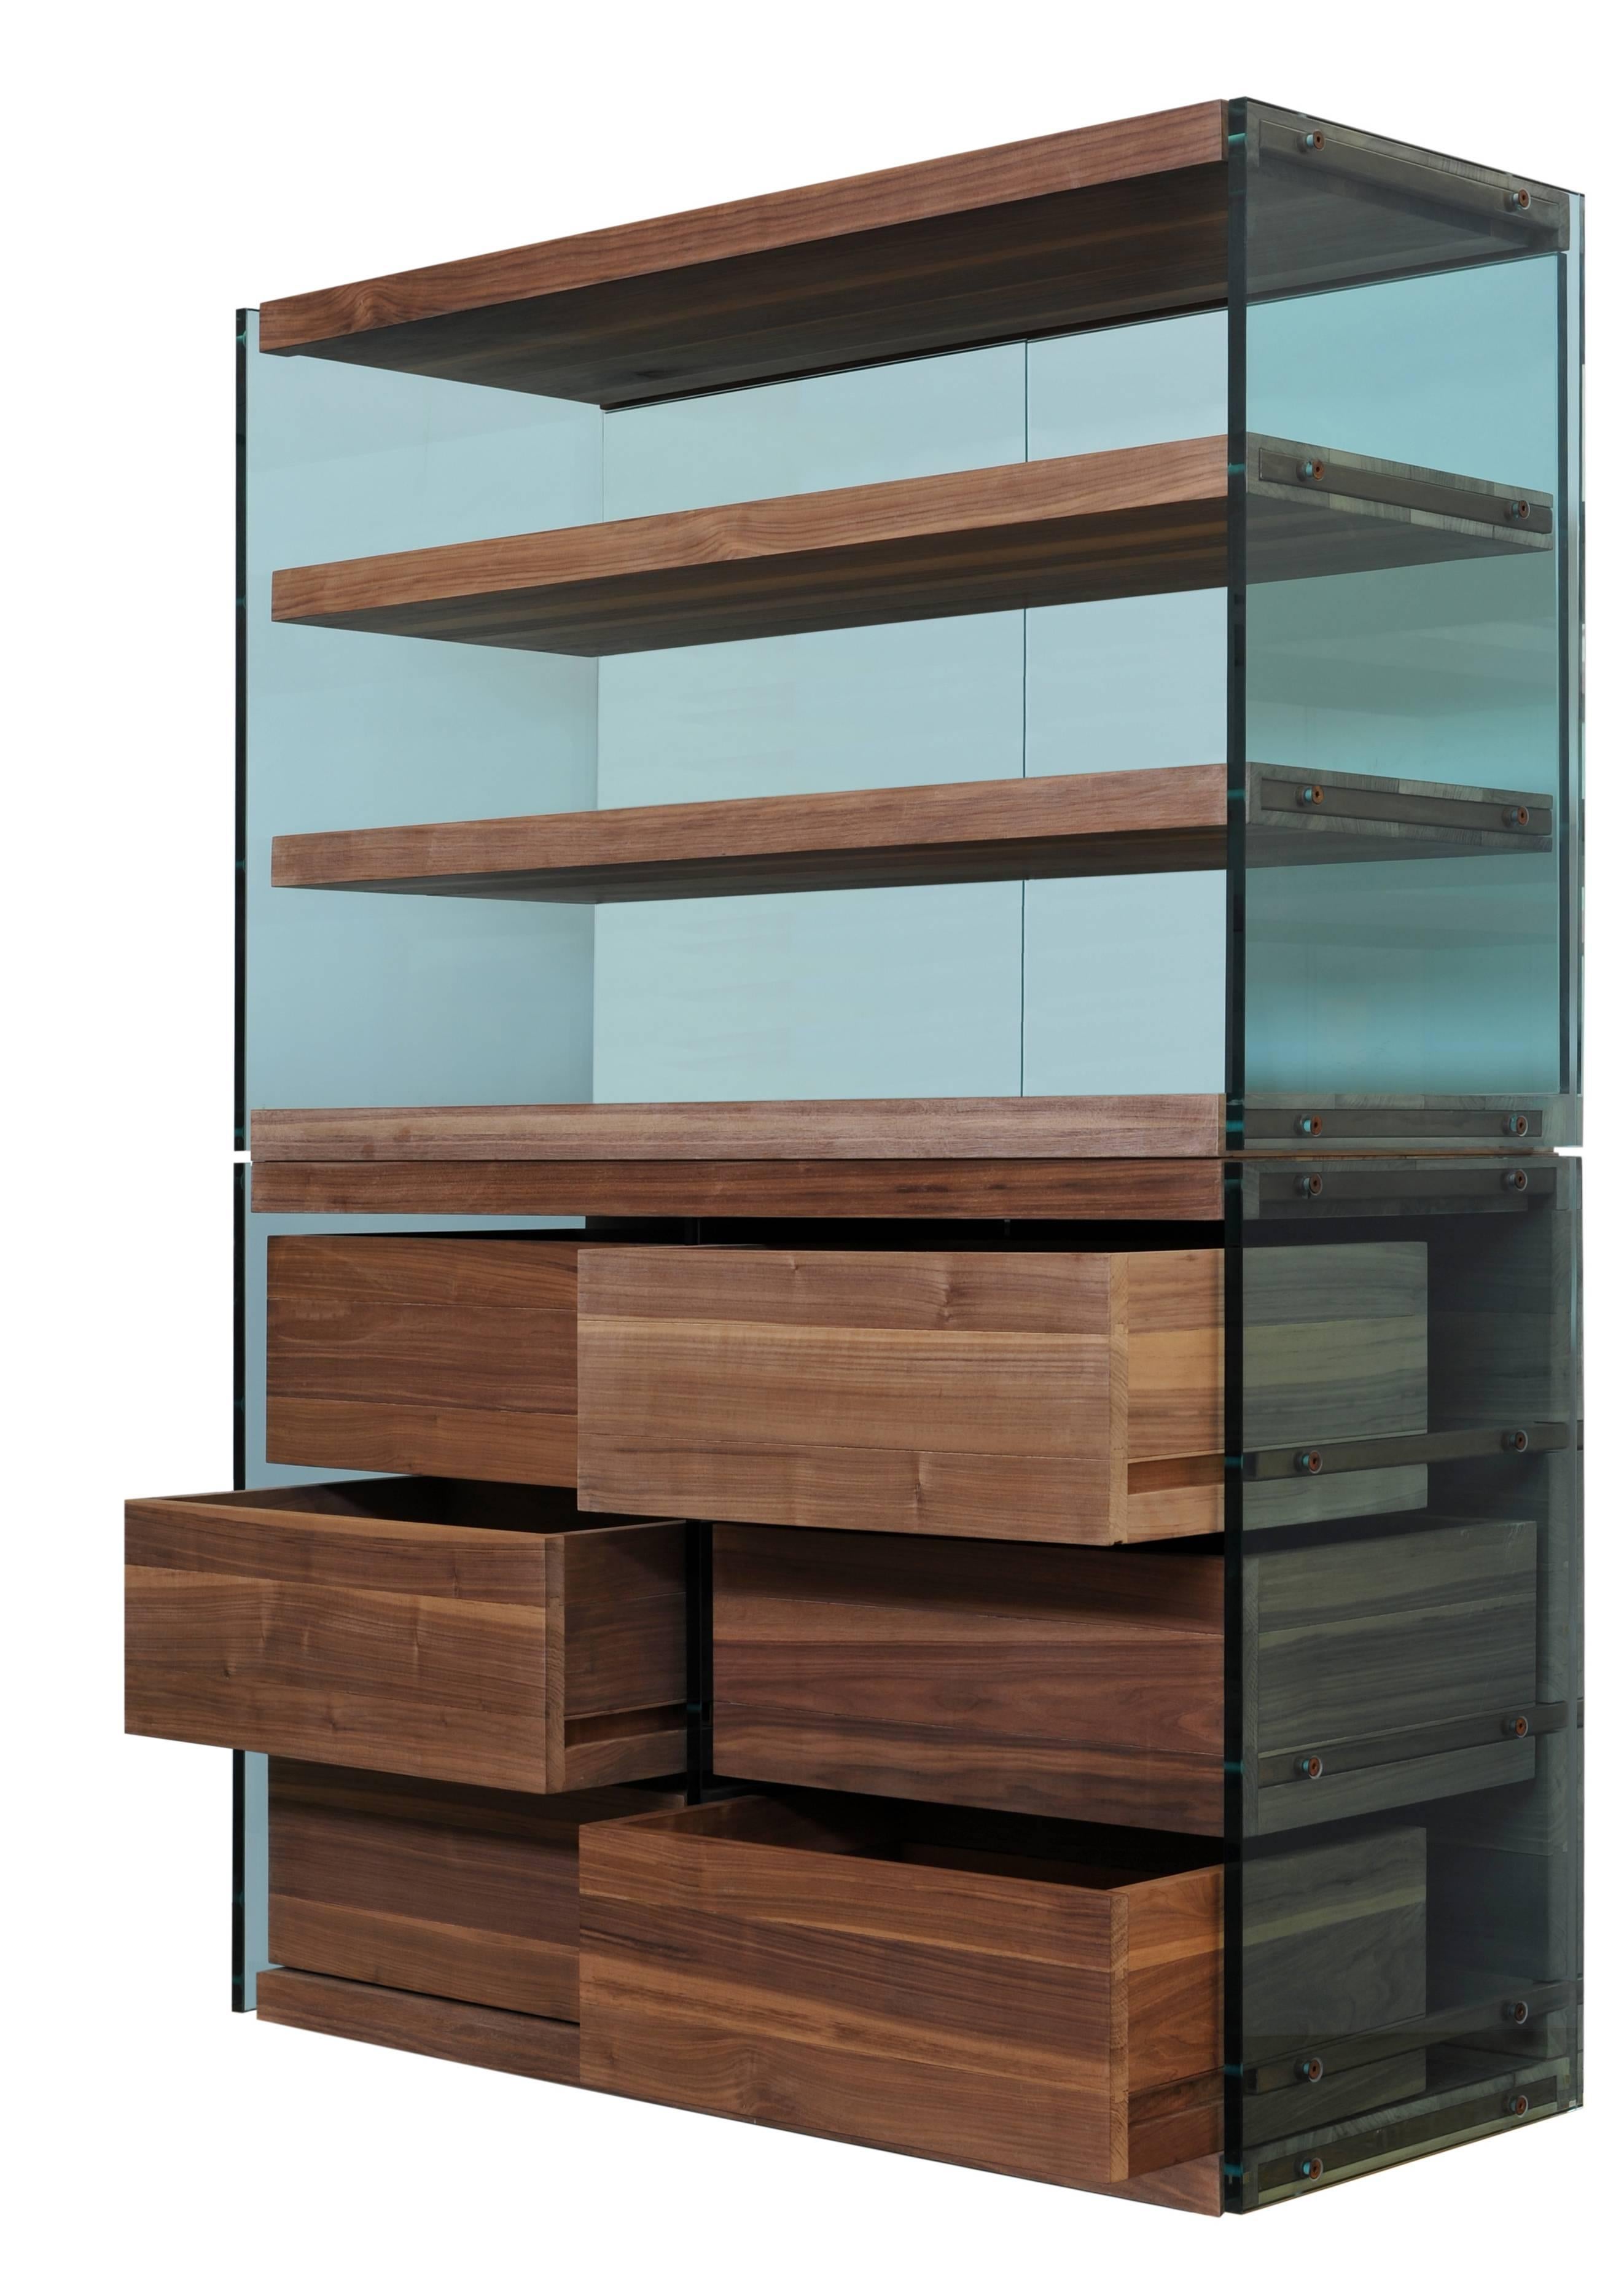 This armoire is constructed of Italian steel, walnut and glass. Its side panels are made of glass, the back panel made of glass and black walnut, and drawers constructed of only black walnut, with all solid wood fixed with natural glue. The metallic